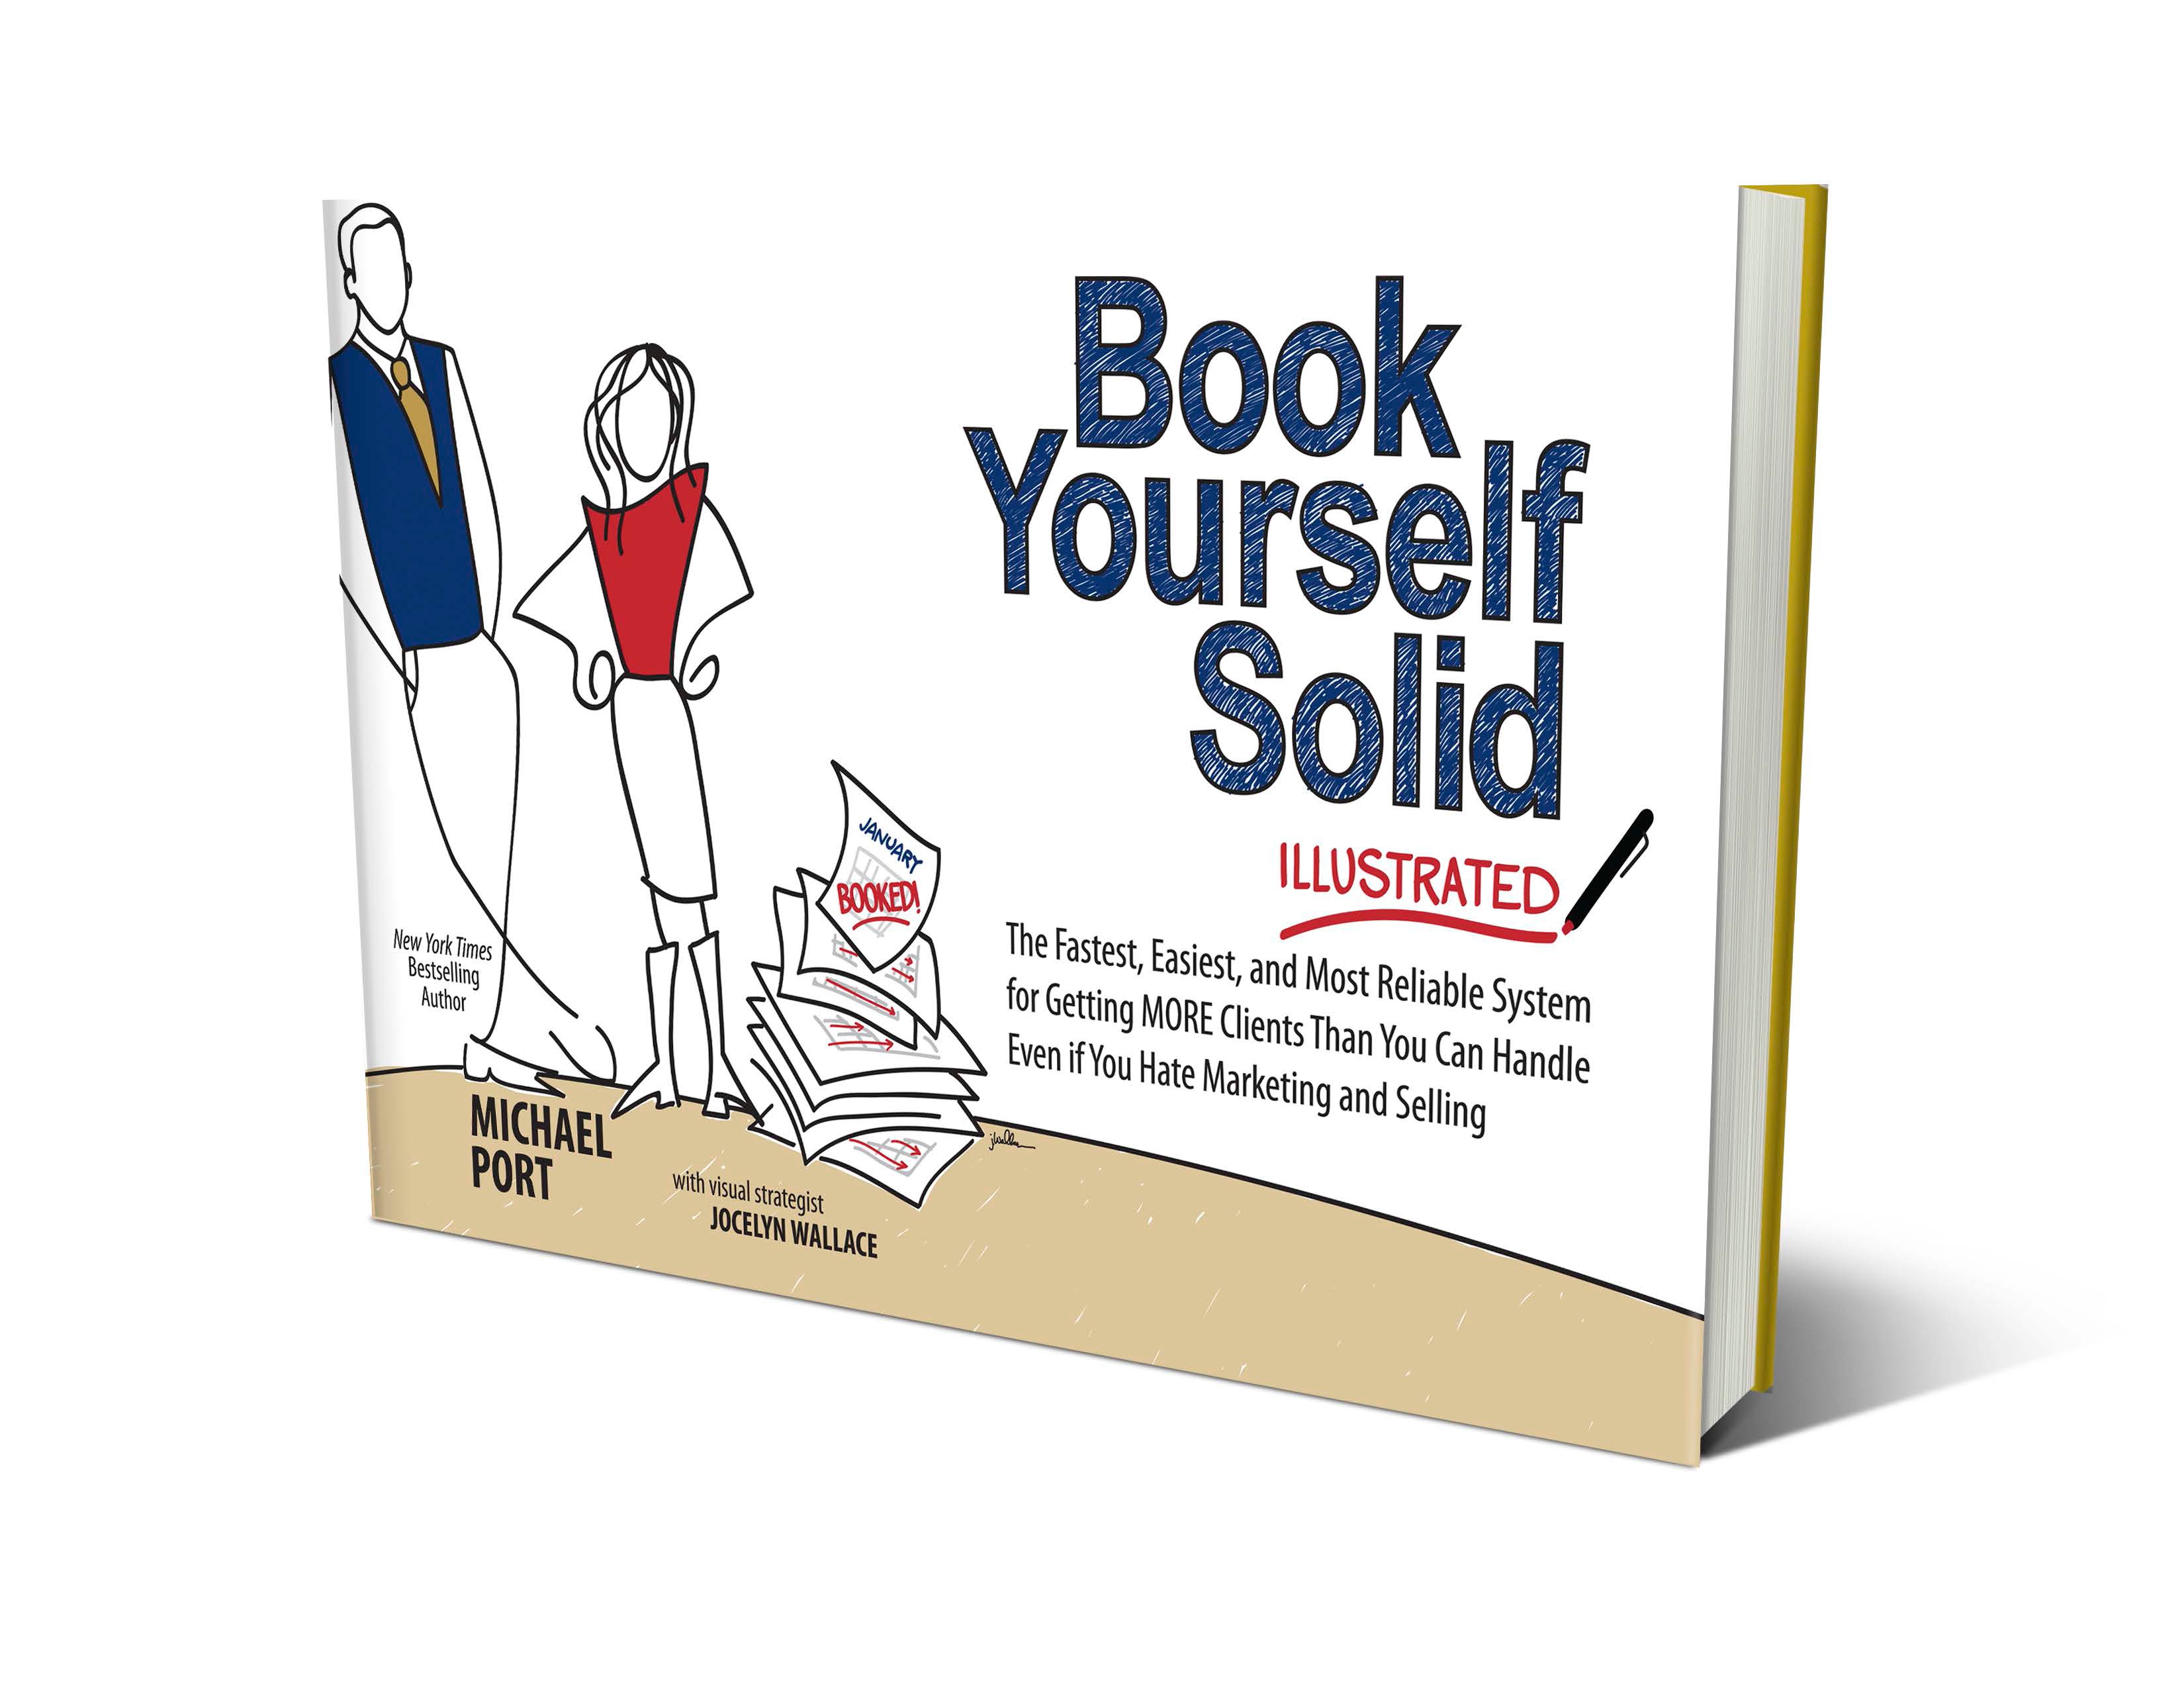 book yourself solid illustrated pdf download